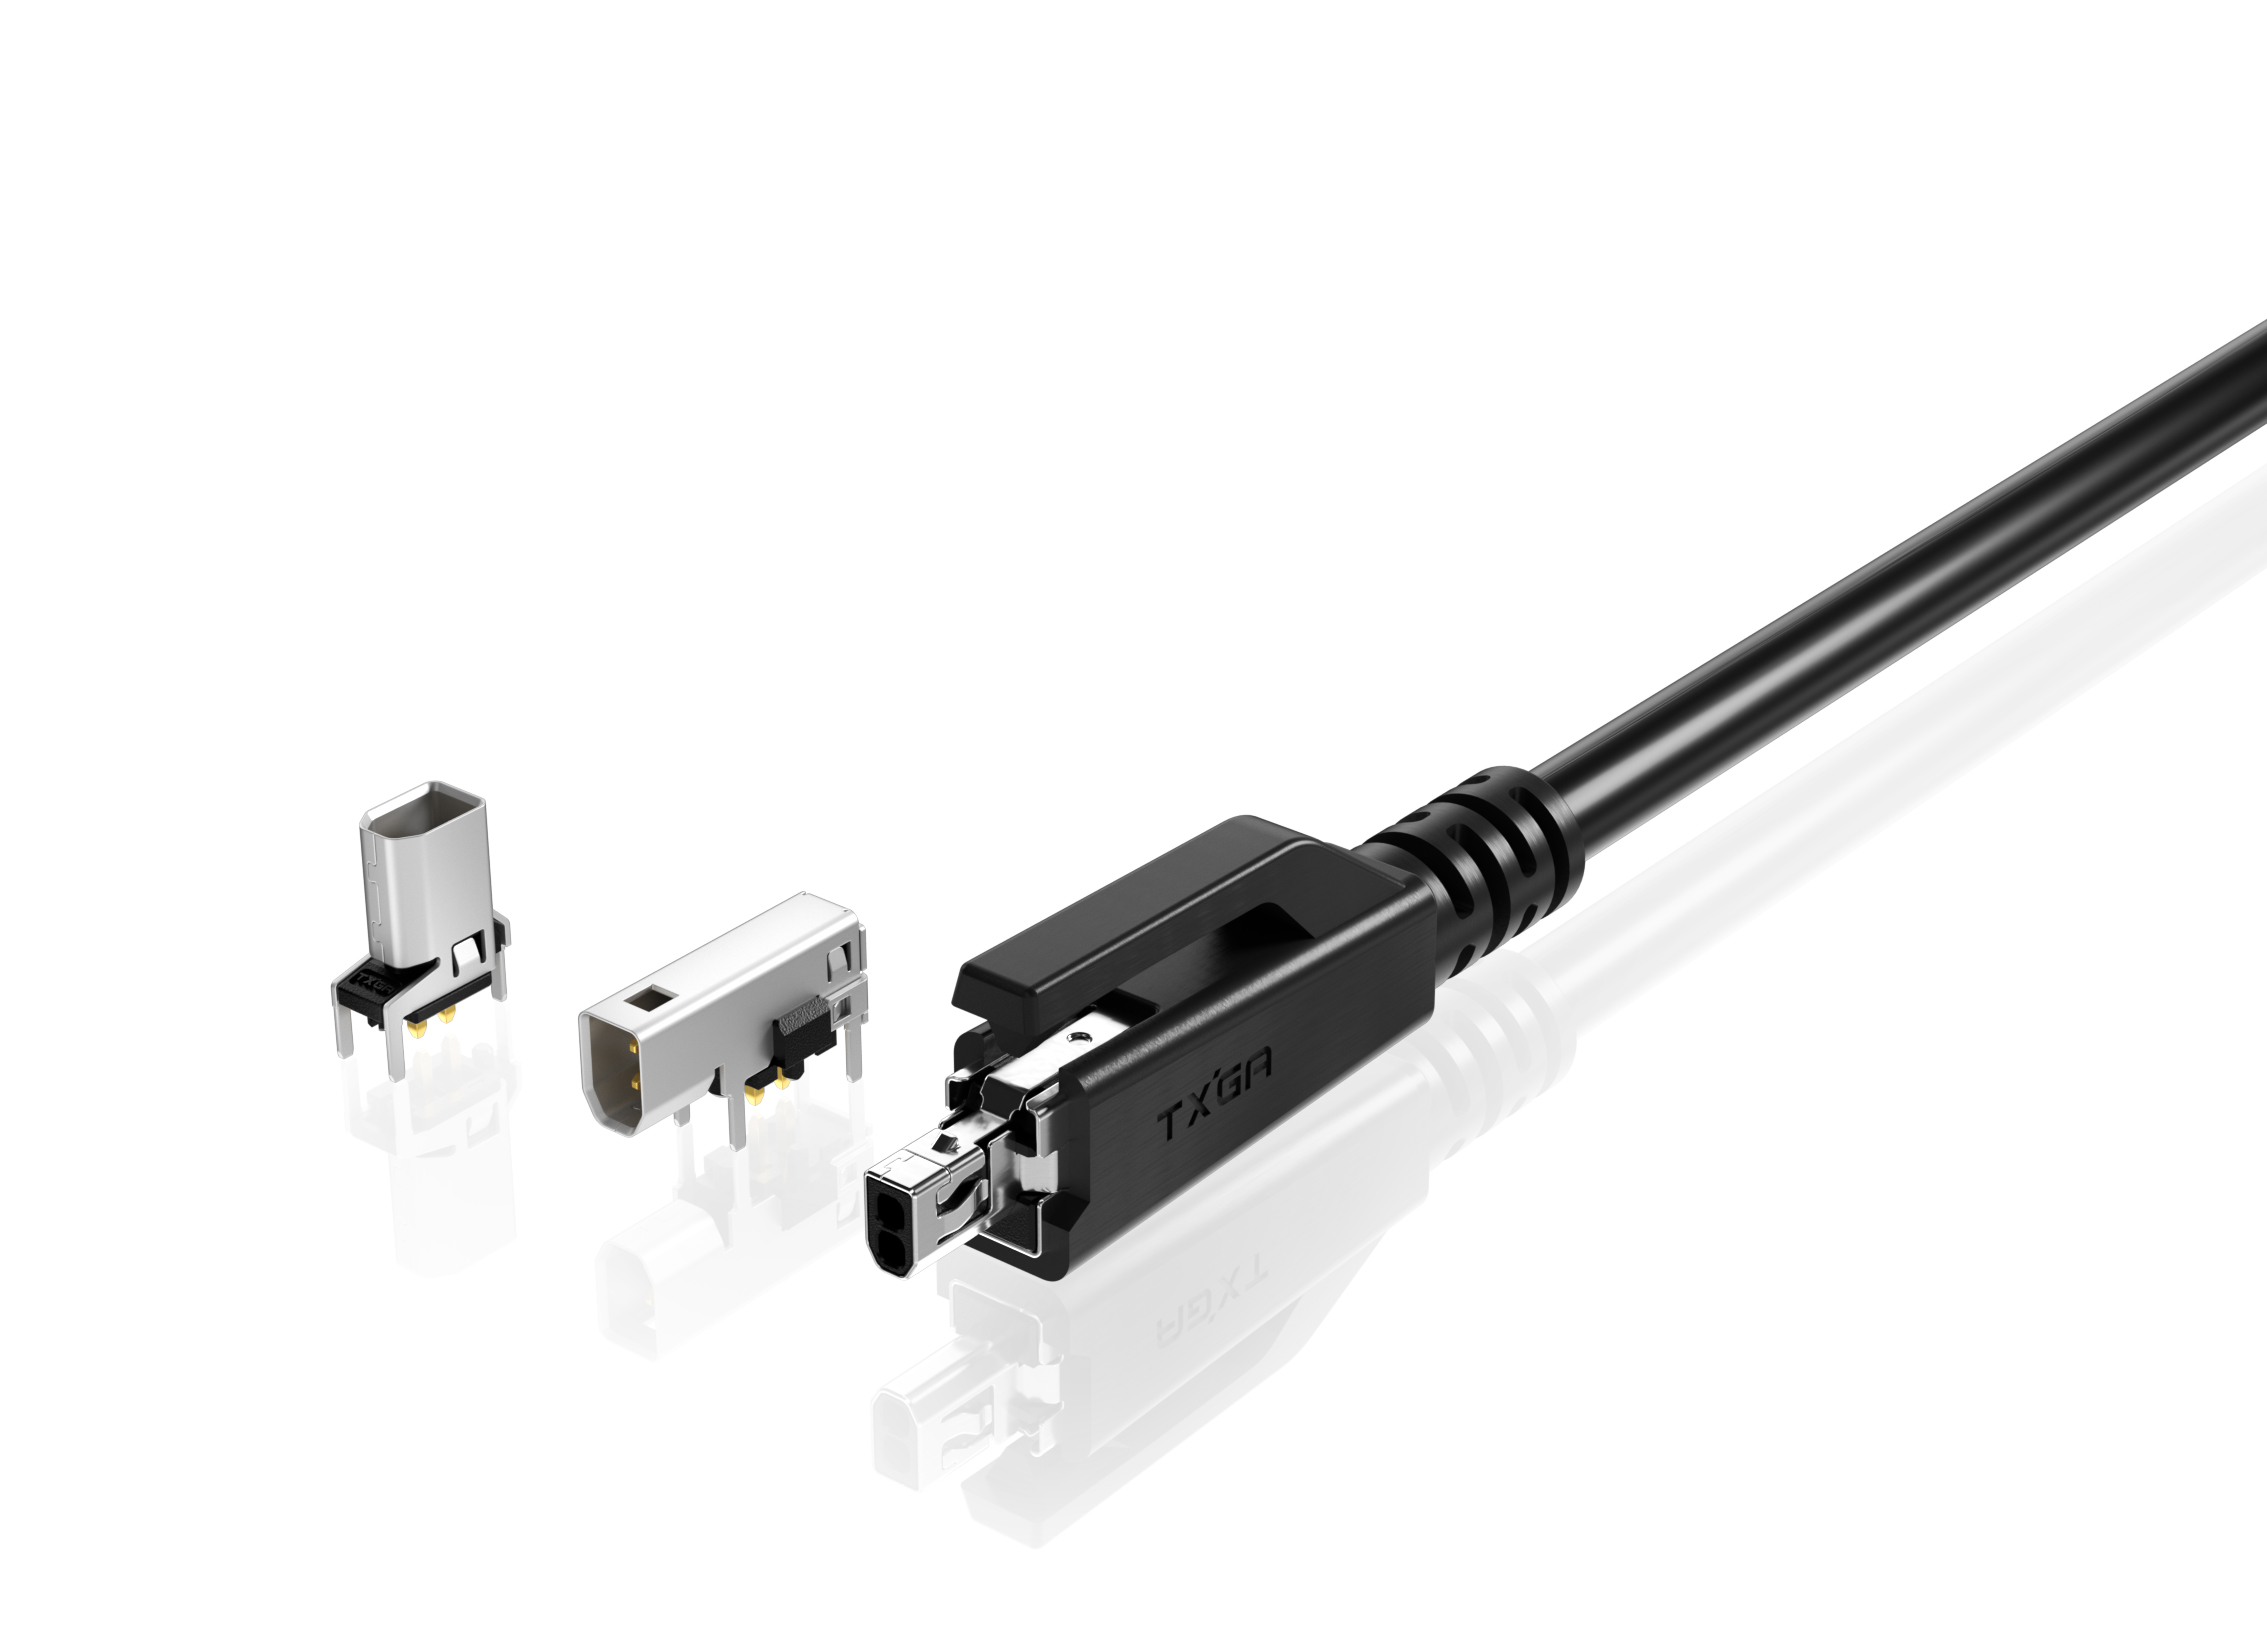 The TXGA single pair Ethernet (SPE) connector combines the characteristics of miniaturization and high performance, with a product 